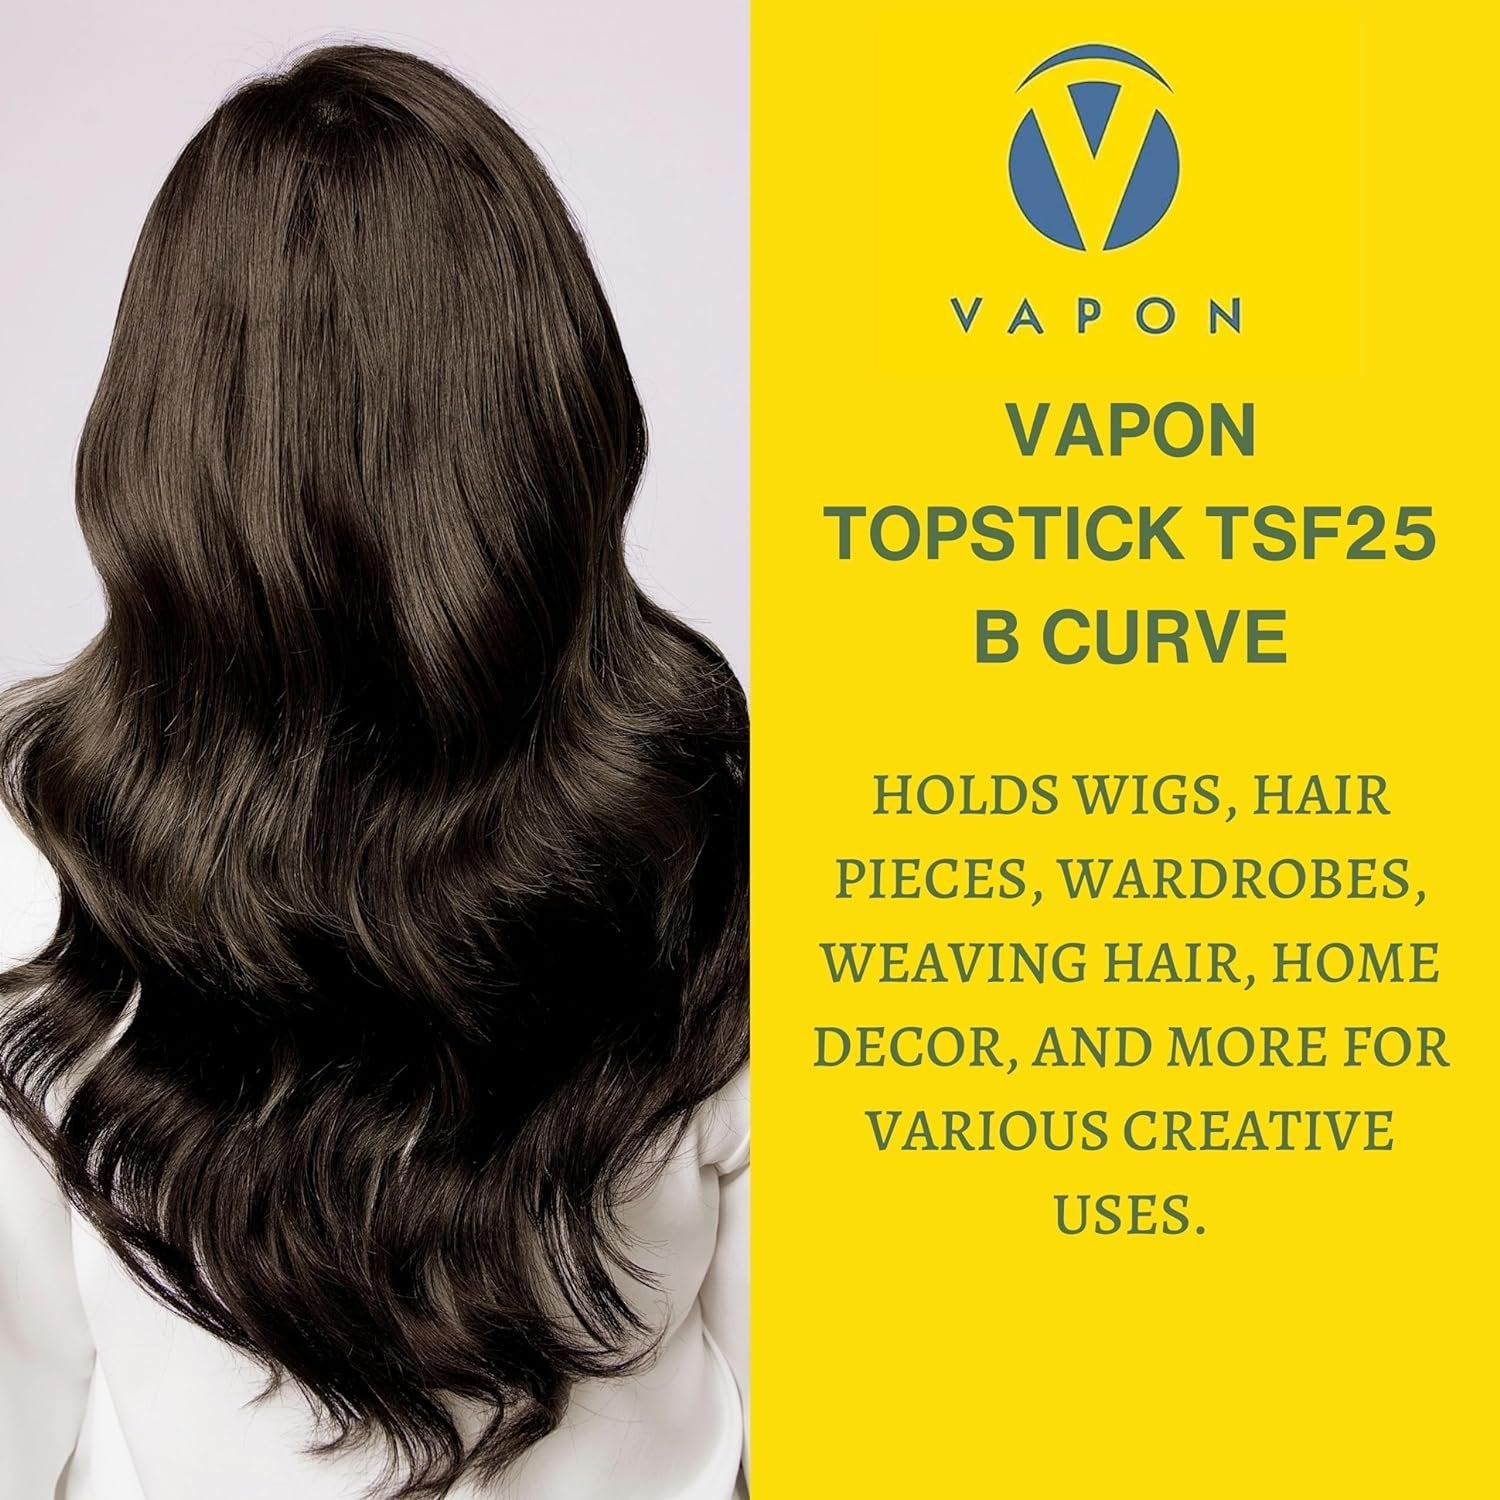 Vapon Topstick Custom Cut A Curve - Style & Confidence Tape in Hair Extensions - 3 Pack, 150 Double-Sided Strips Lace Tape for Wigs & Multi-Purpose Key Chain